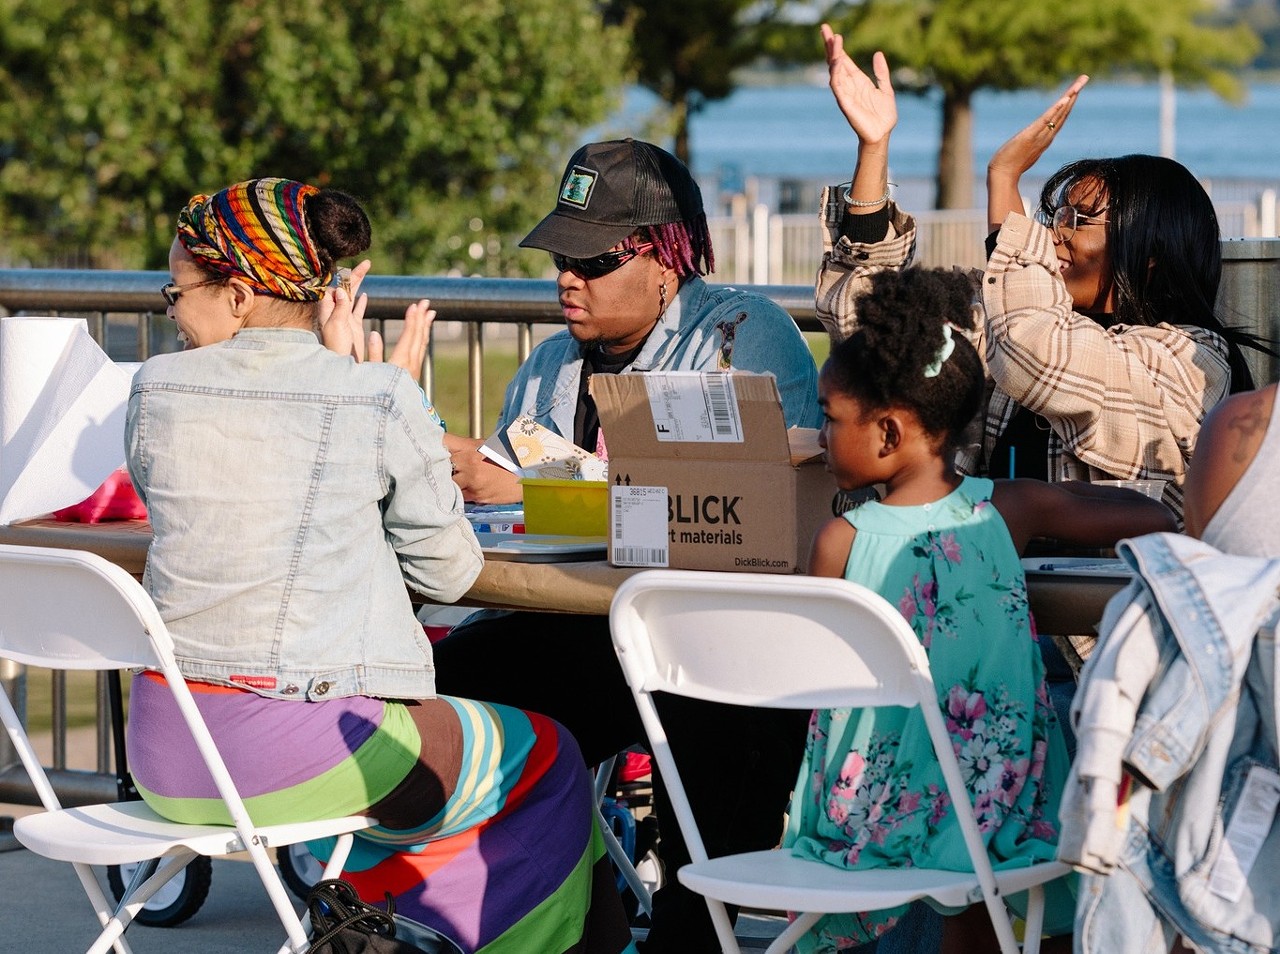 
Sprouting Our Writing Poetry Picnic 
When: April 13 from 1-3 p.m.
Where: Valade Park (Detroit)
What: An afternoon of workshops, an open mic, food, and more
Who: Hosted by InsideOut Literary Arts
Why: The event is free for all ages and will feature experienced Detroit poet La Shaun Phoenix Moore.